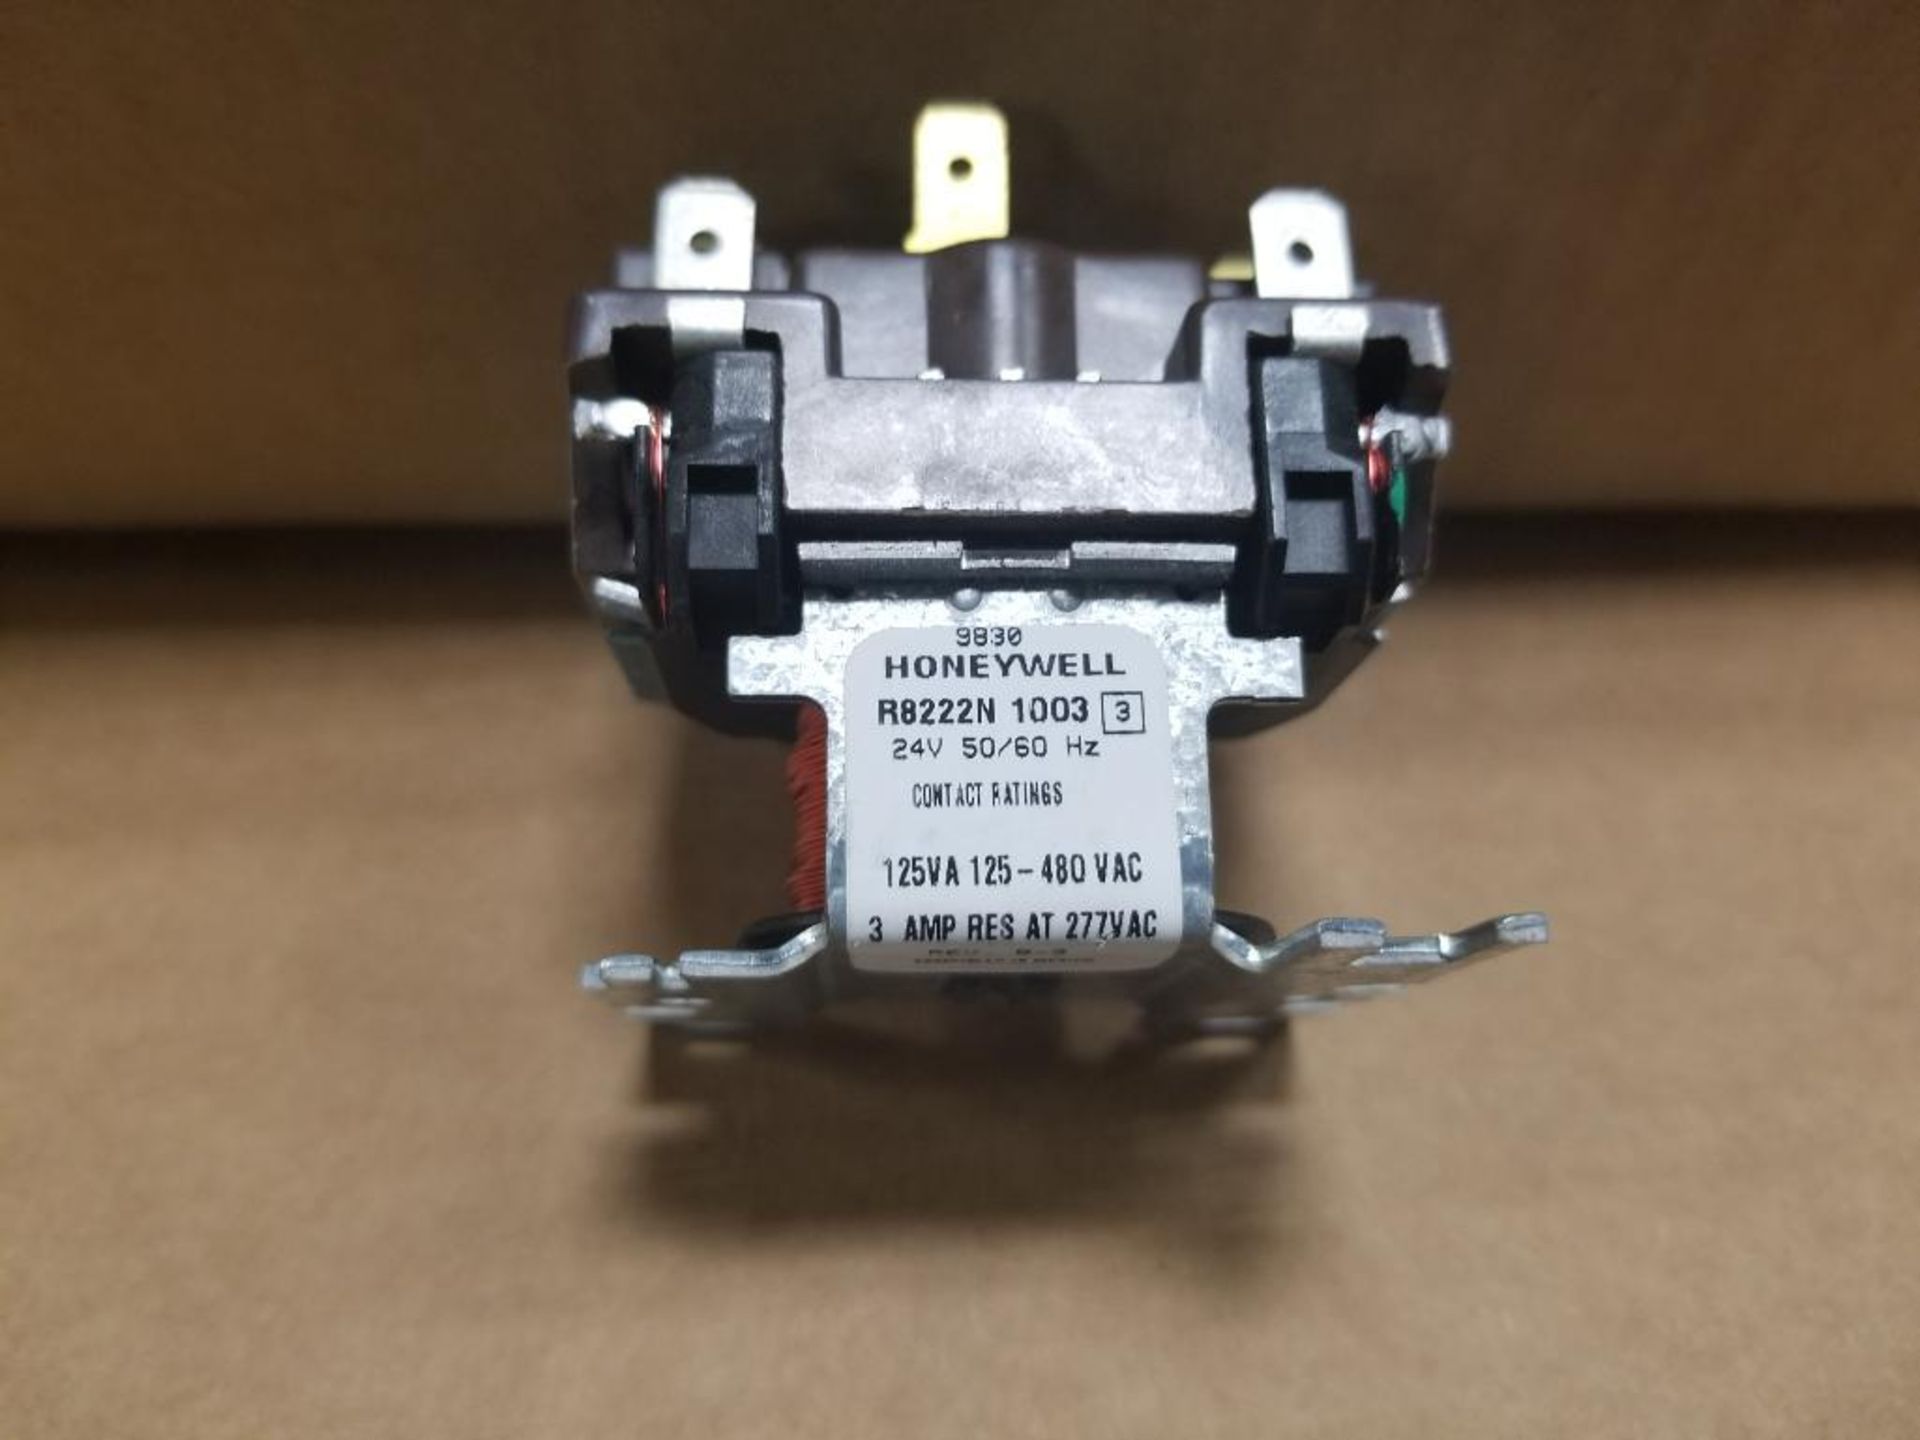 Qty 60 - Honeywell relay. Part number R8222N-1003. New in bulk box. - Image 4 of 5